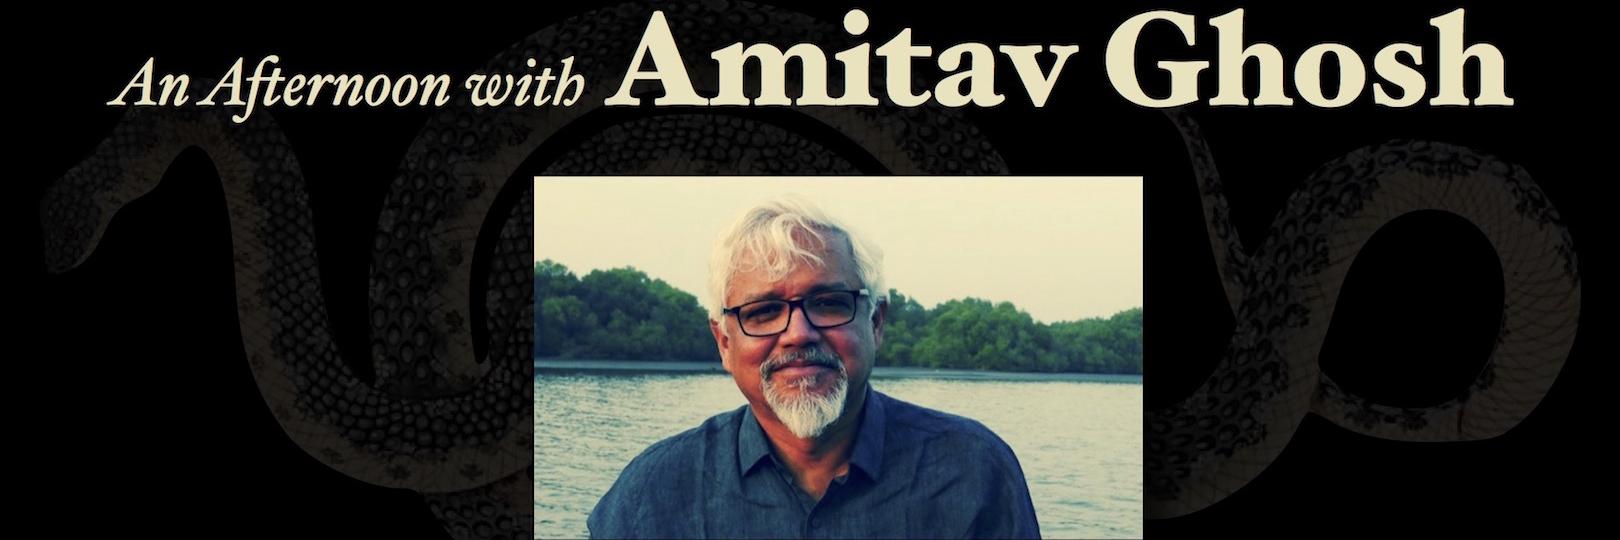 Oct 7: An Afternoon With Amitav Ghosh 